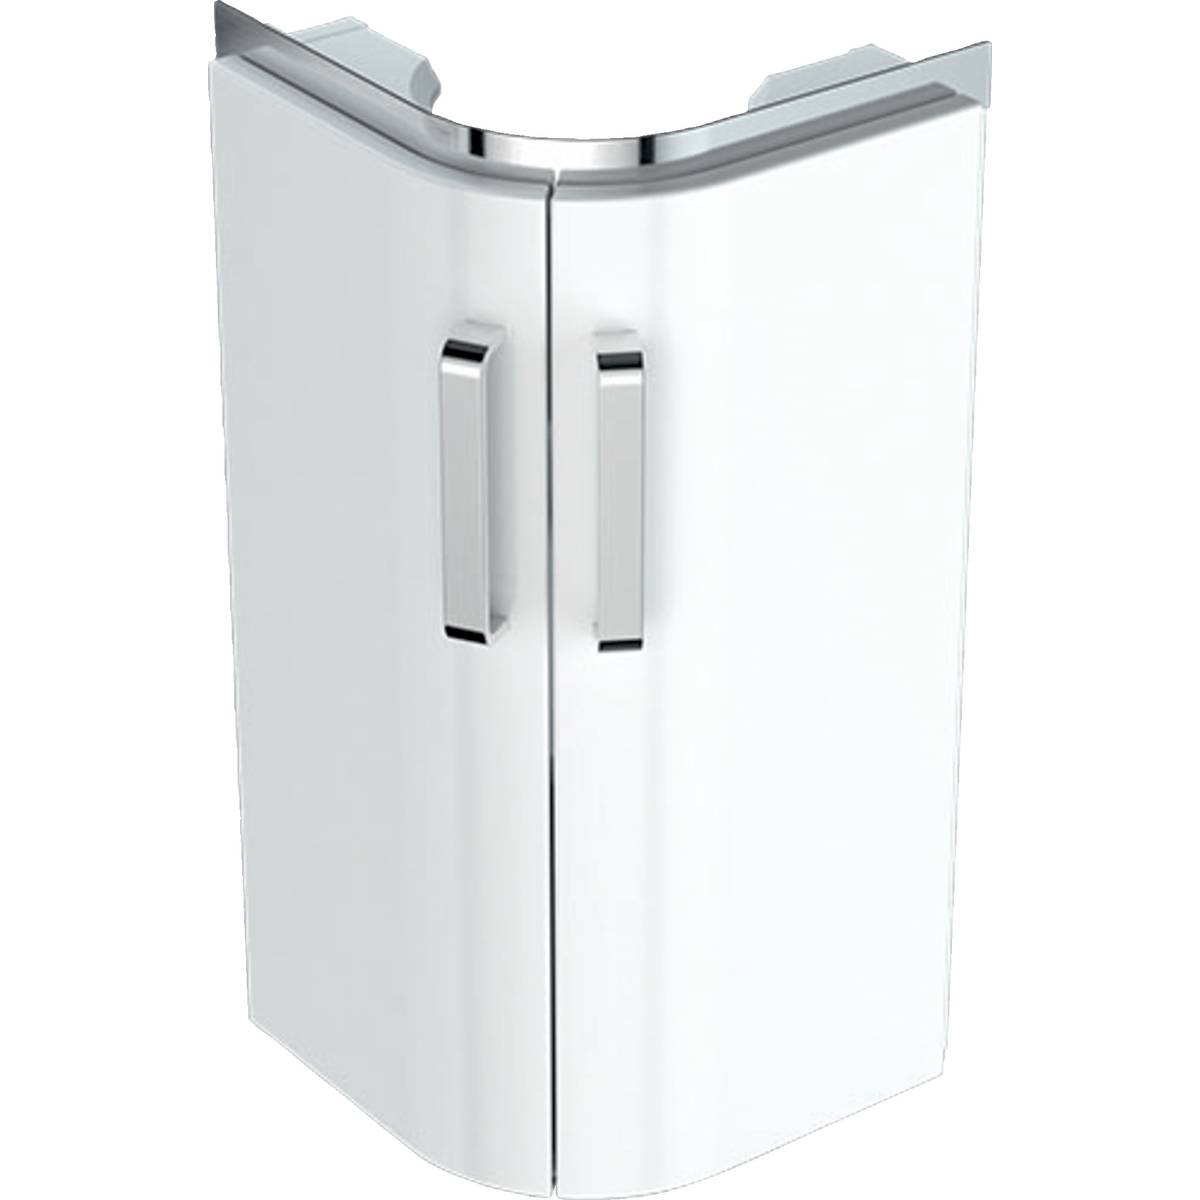 Selnova Compact Cabinet for Corner Handrinse Basin, with Two Doors